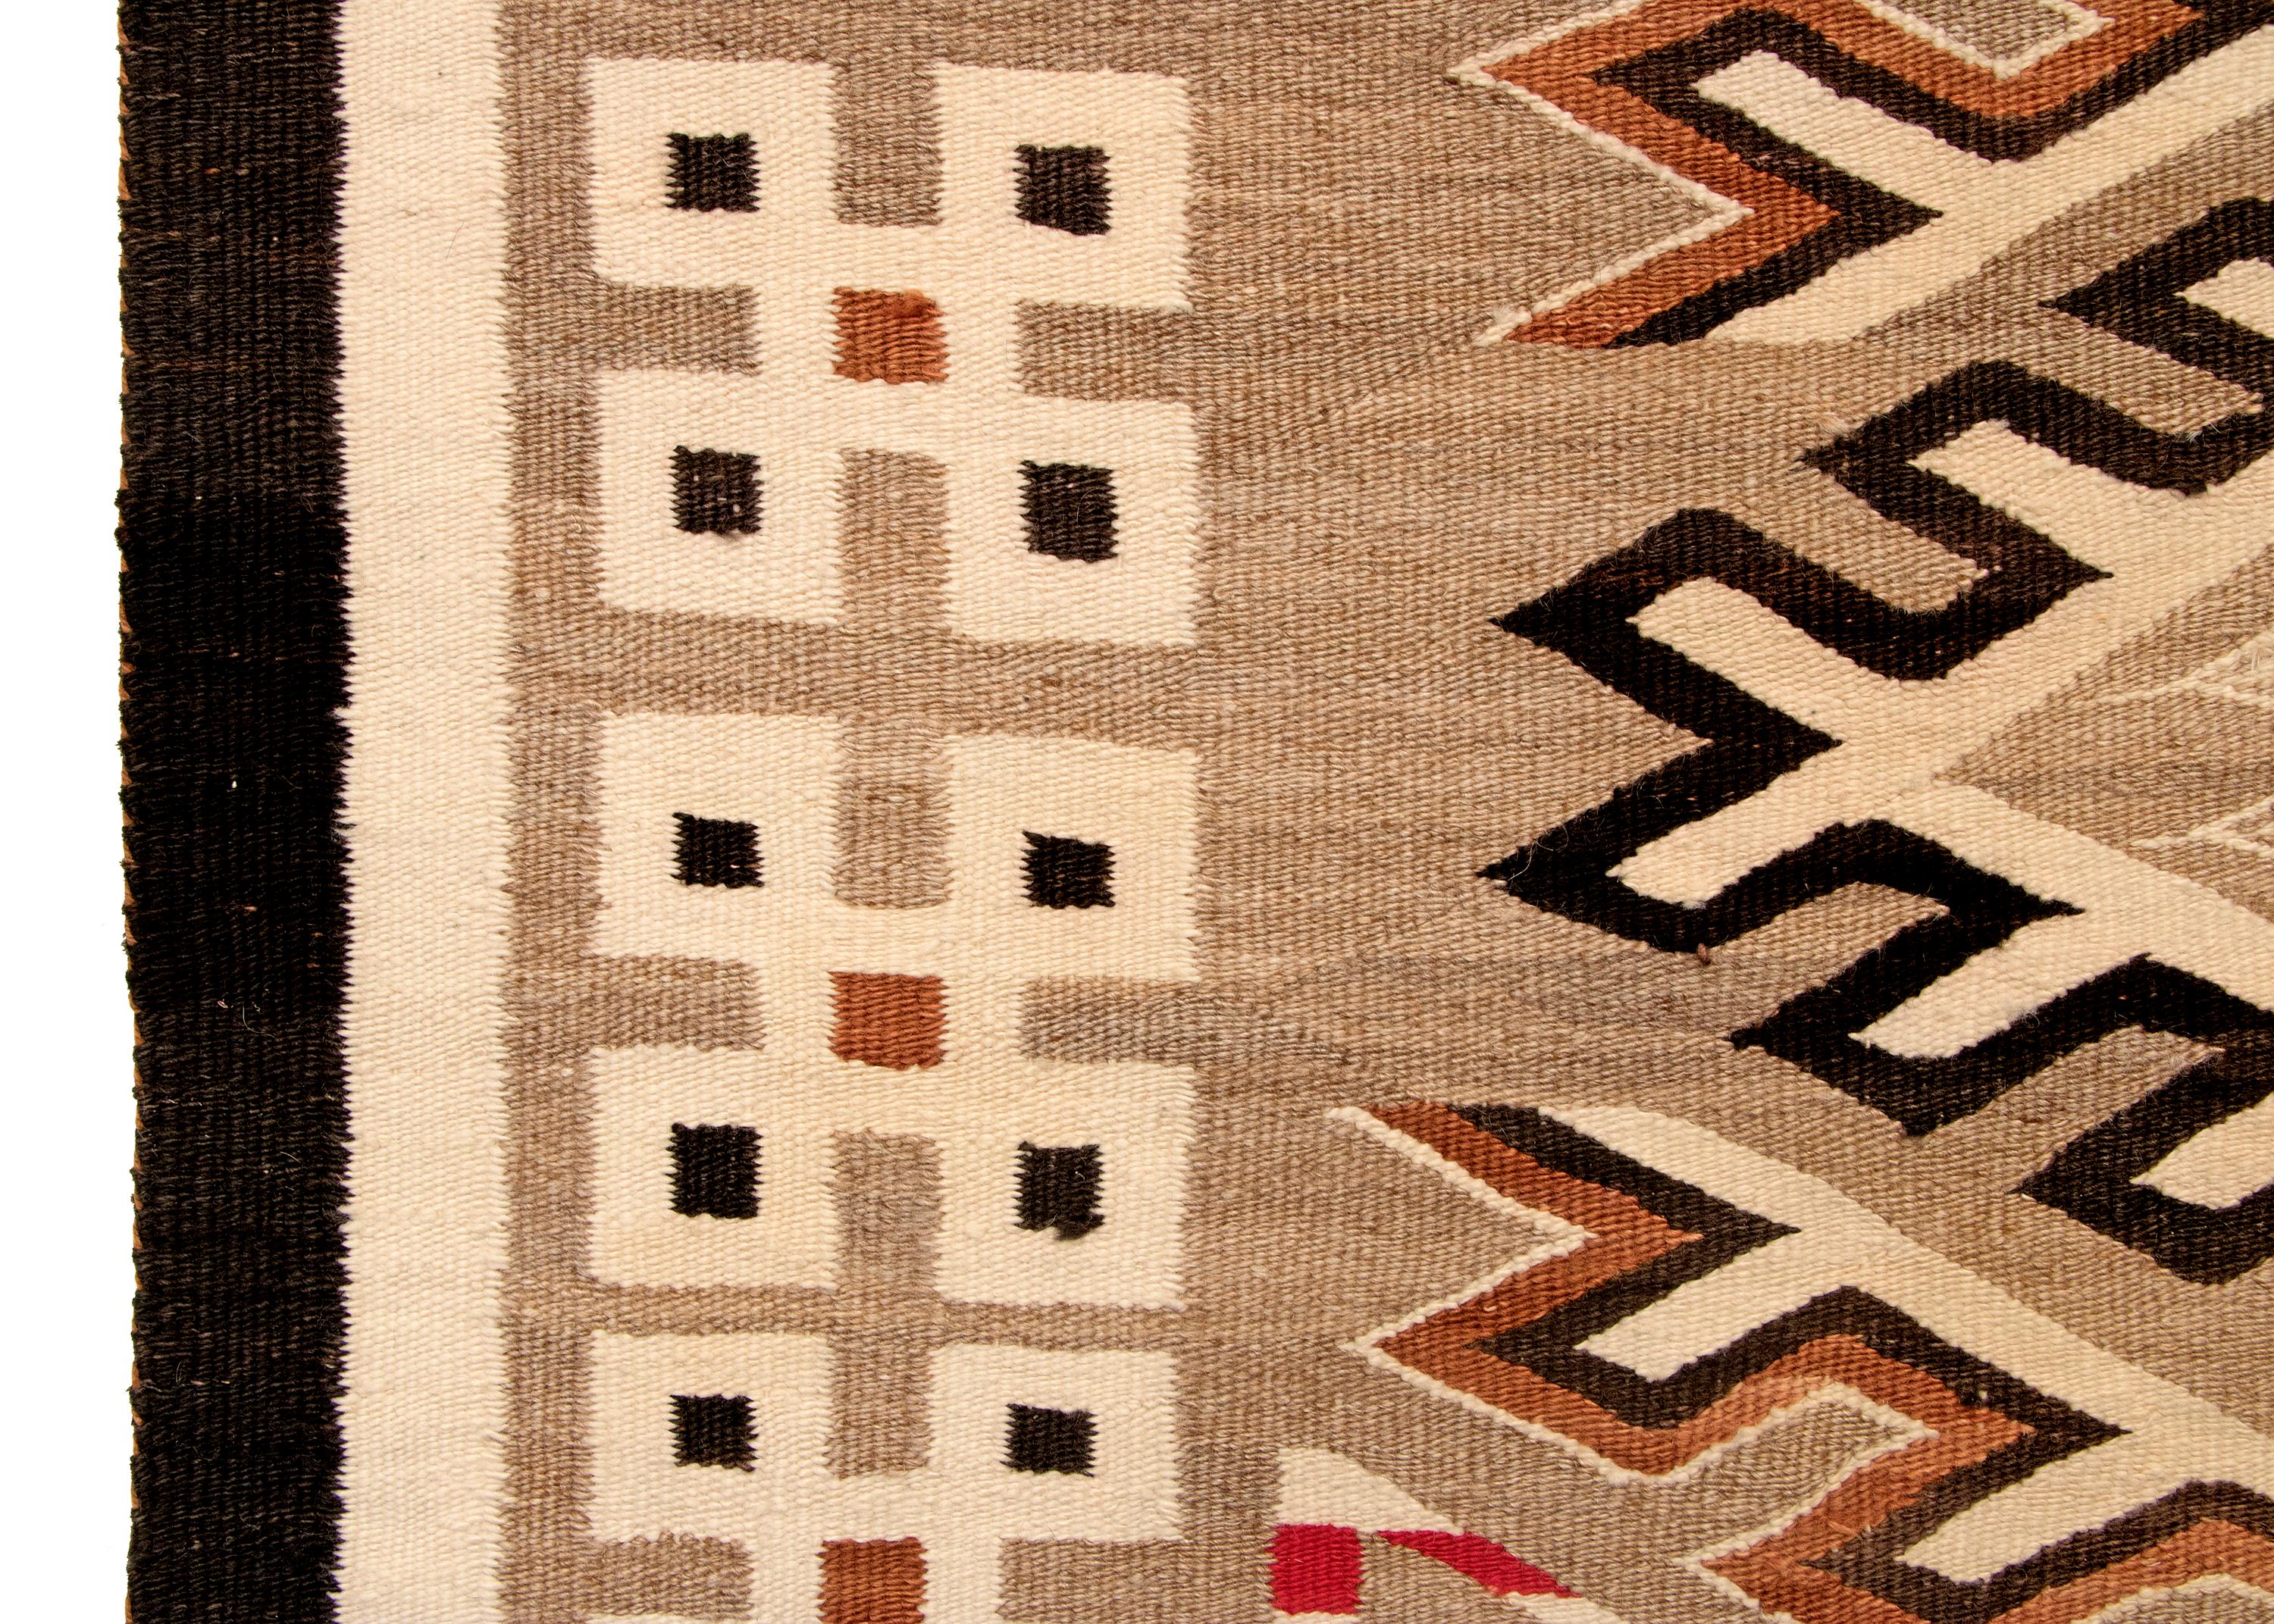 Native American Vintage 20th Century Navajo Rug from the Trading Post Era